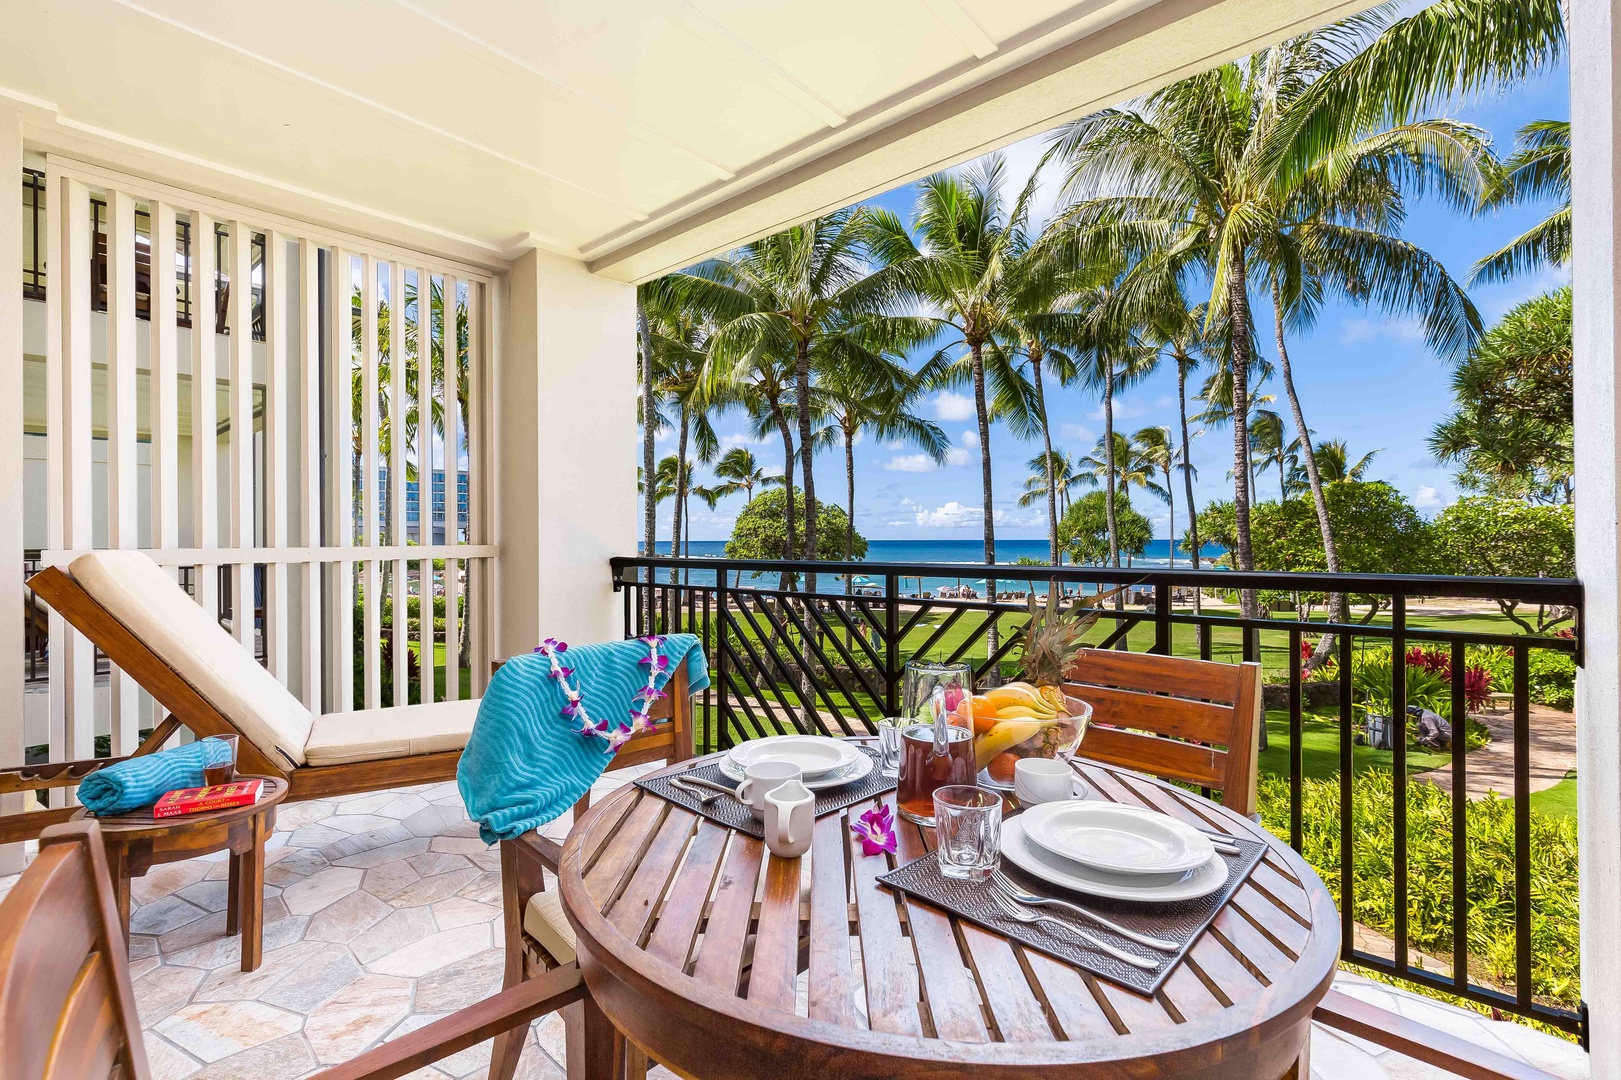 Kahuku Vacation Rentals, Turtle Bay Villas 205 - Only blissful satisfaction when you stay with us